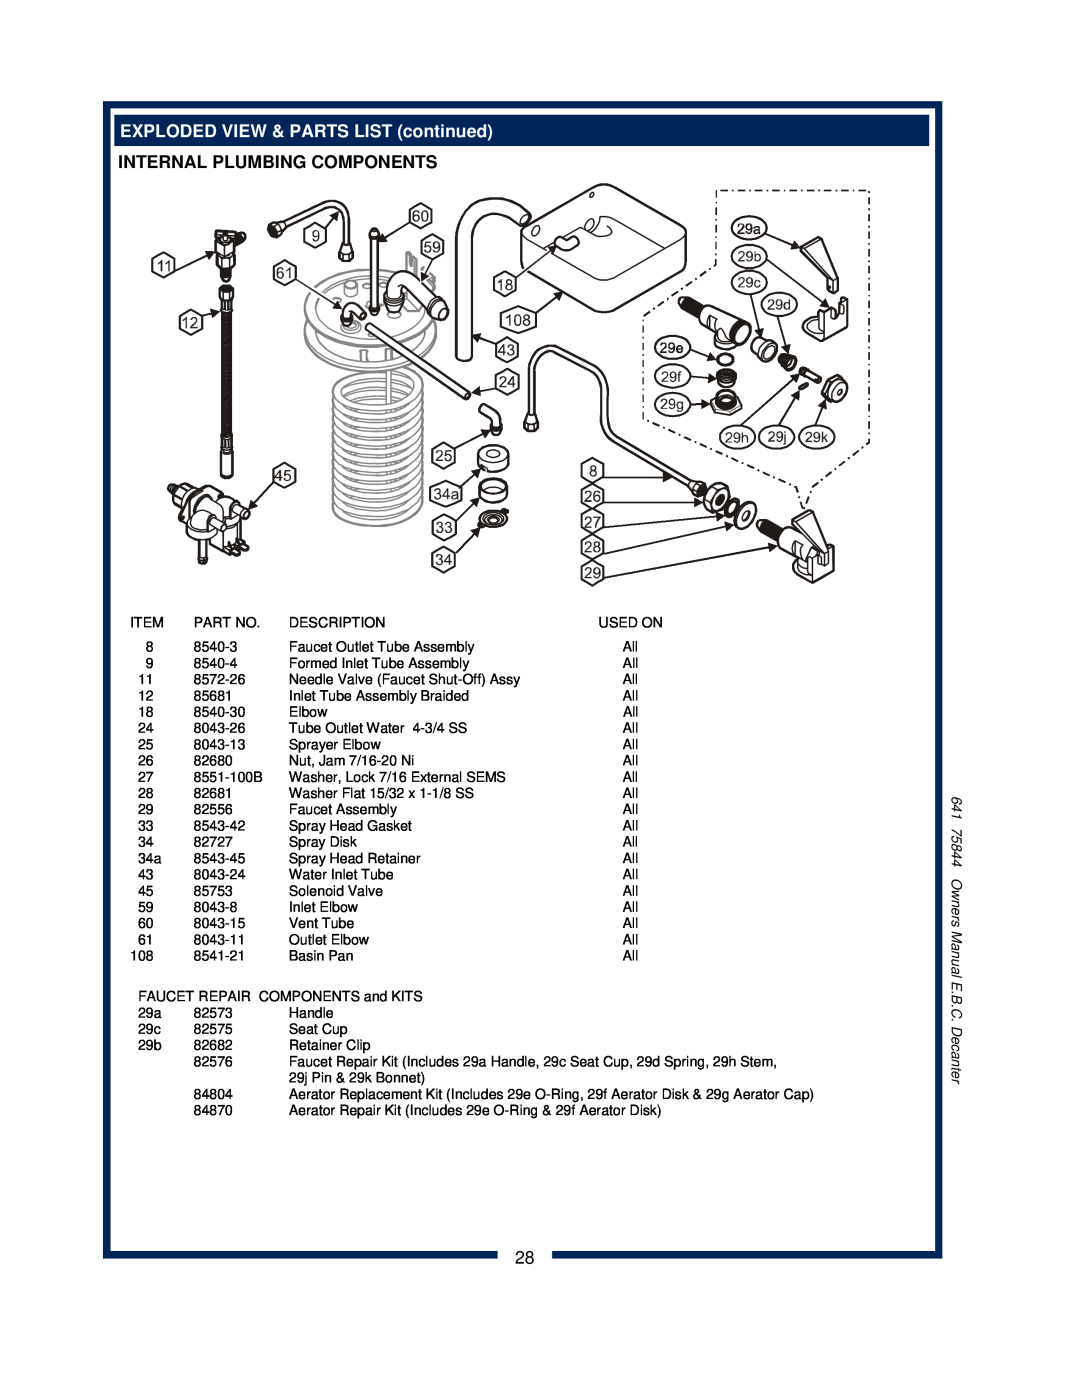 Bloomfield 1012, 1040, 1072 owner manual EXPLODED VIEW & PARTS LIST continued, Internal Plumbing Components, Decanter 